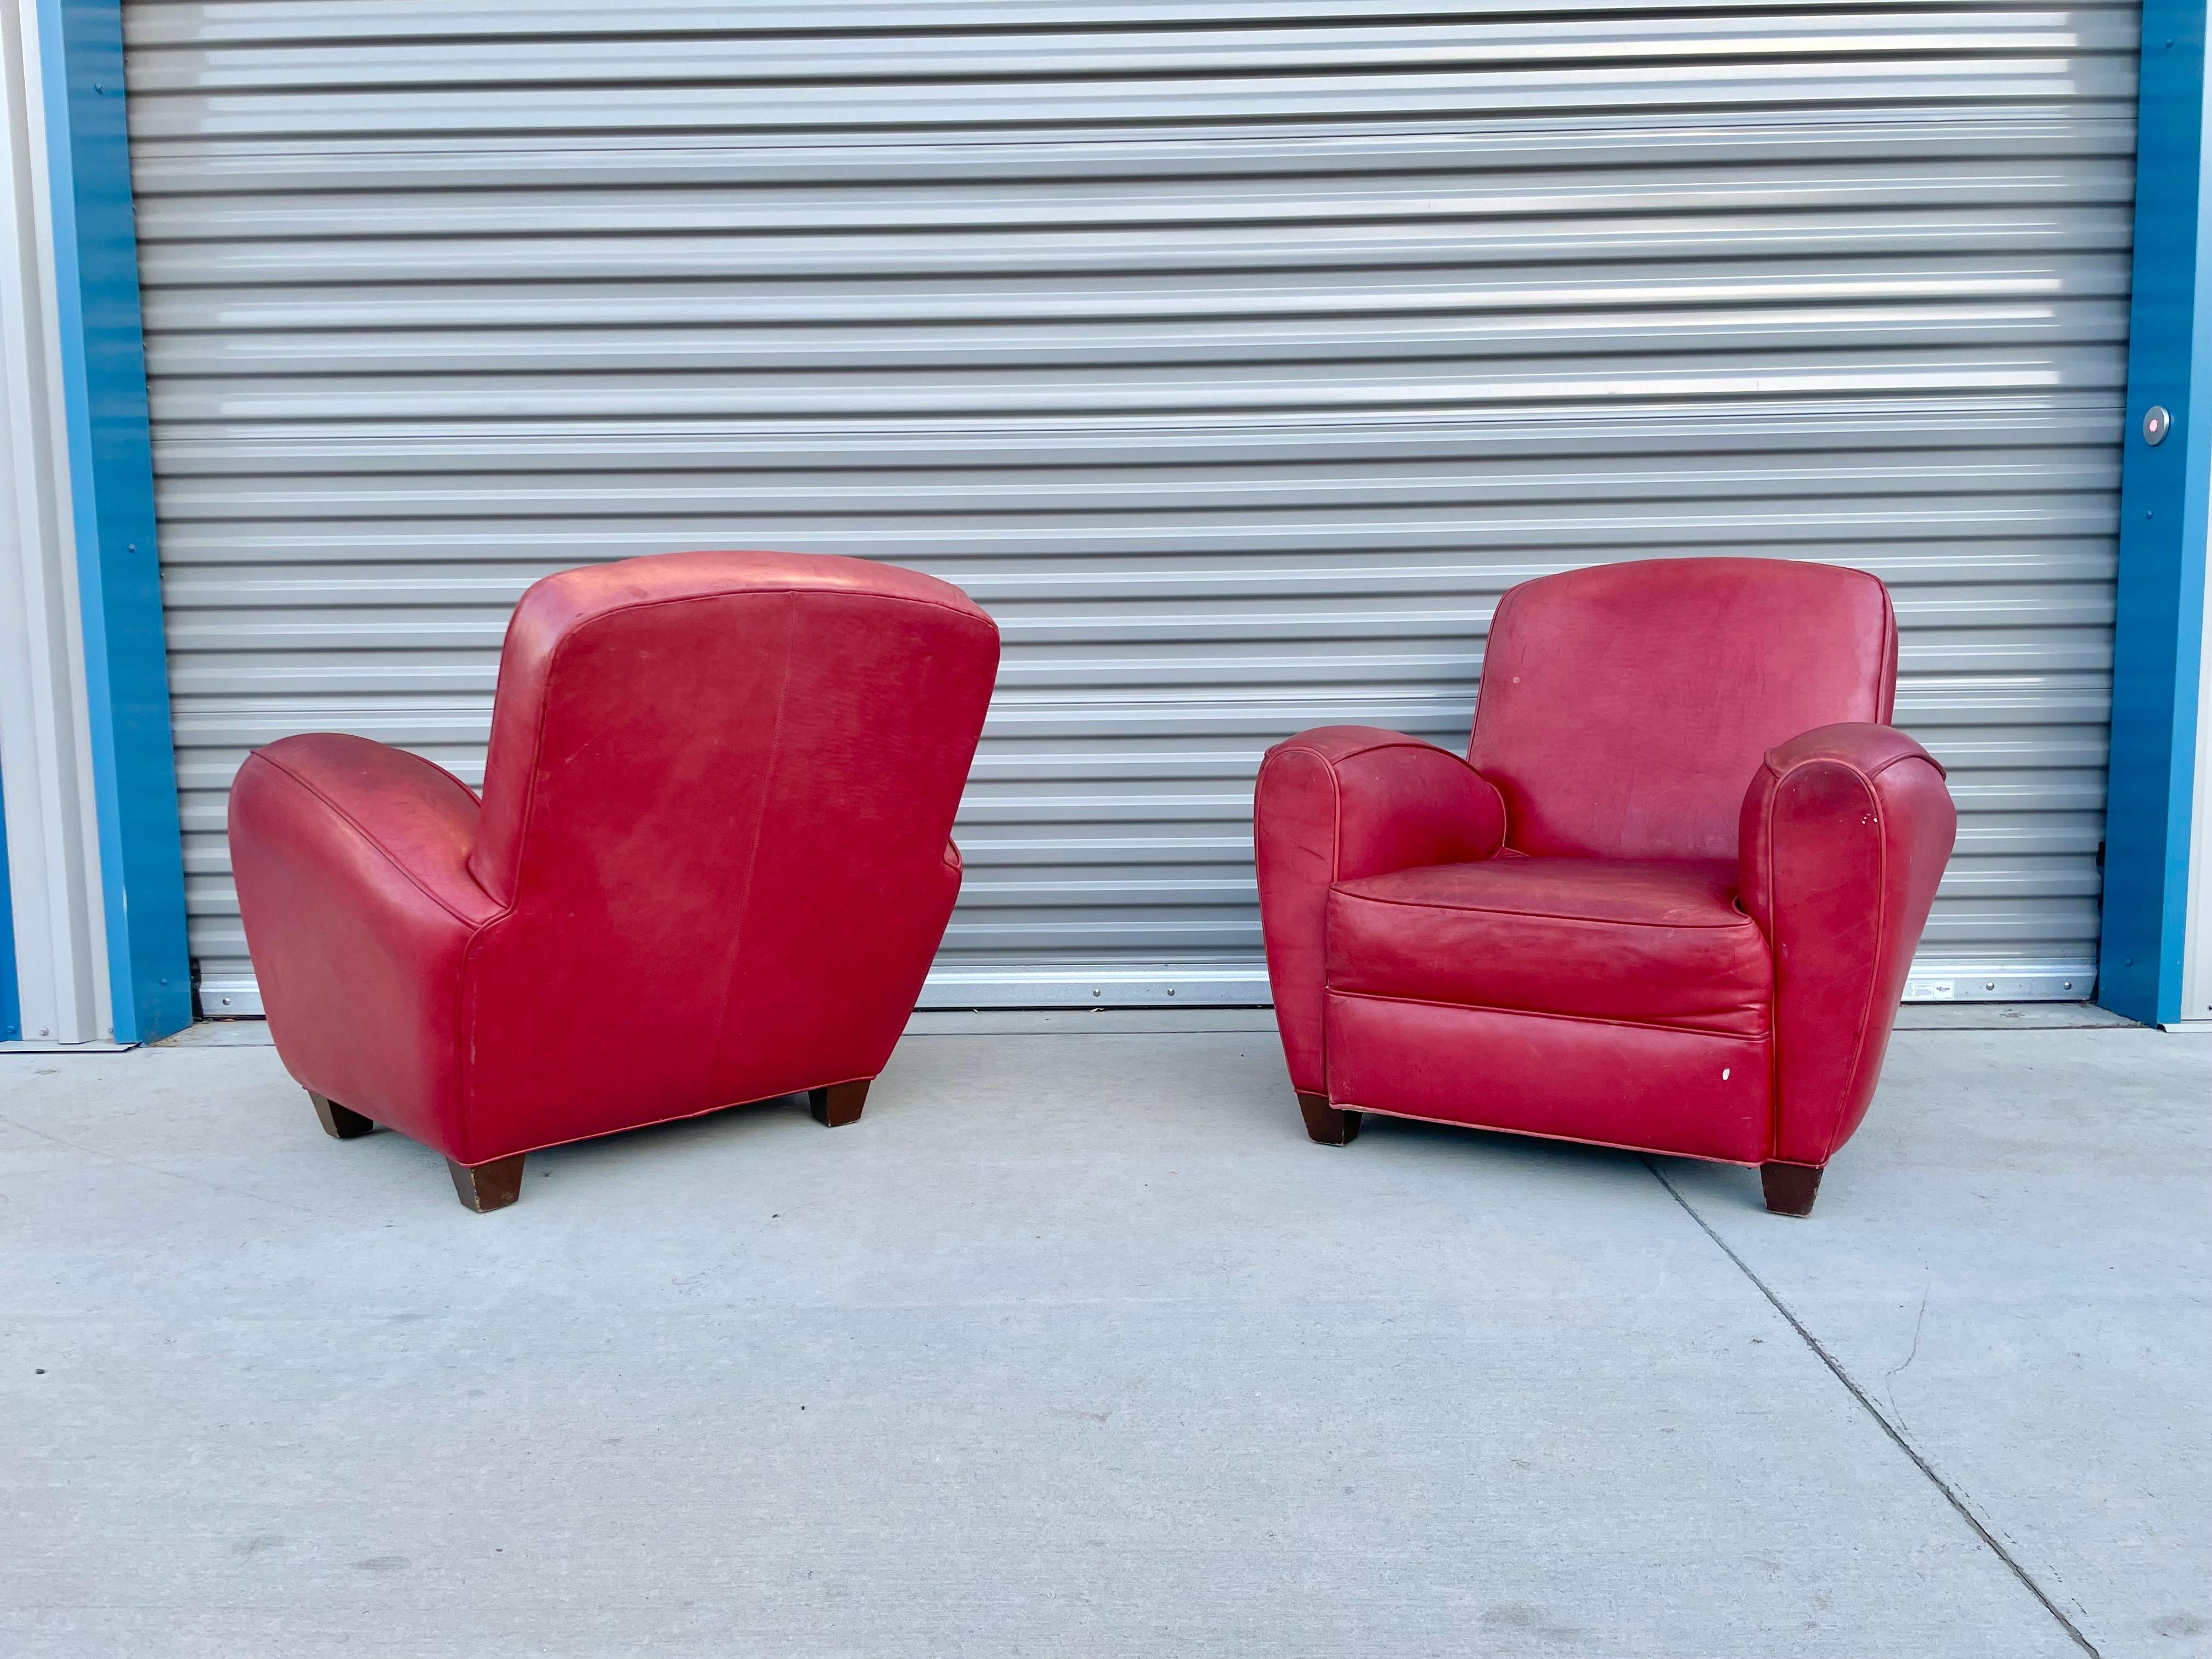 Vintage Leather Lounge Chairs & Ottoman In Good Condition For Sale In North Hollywood, CA